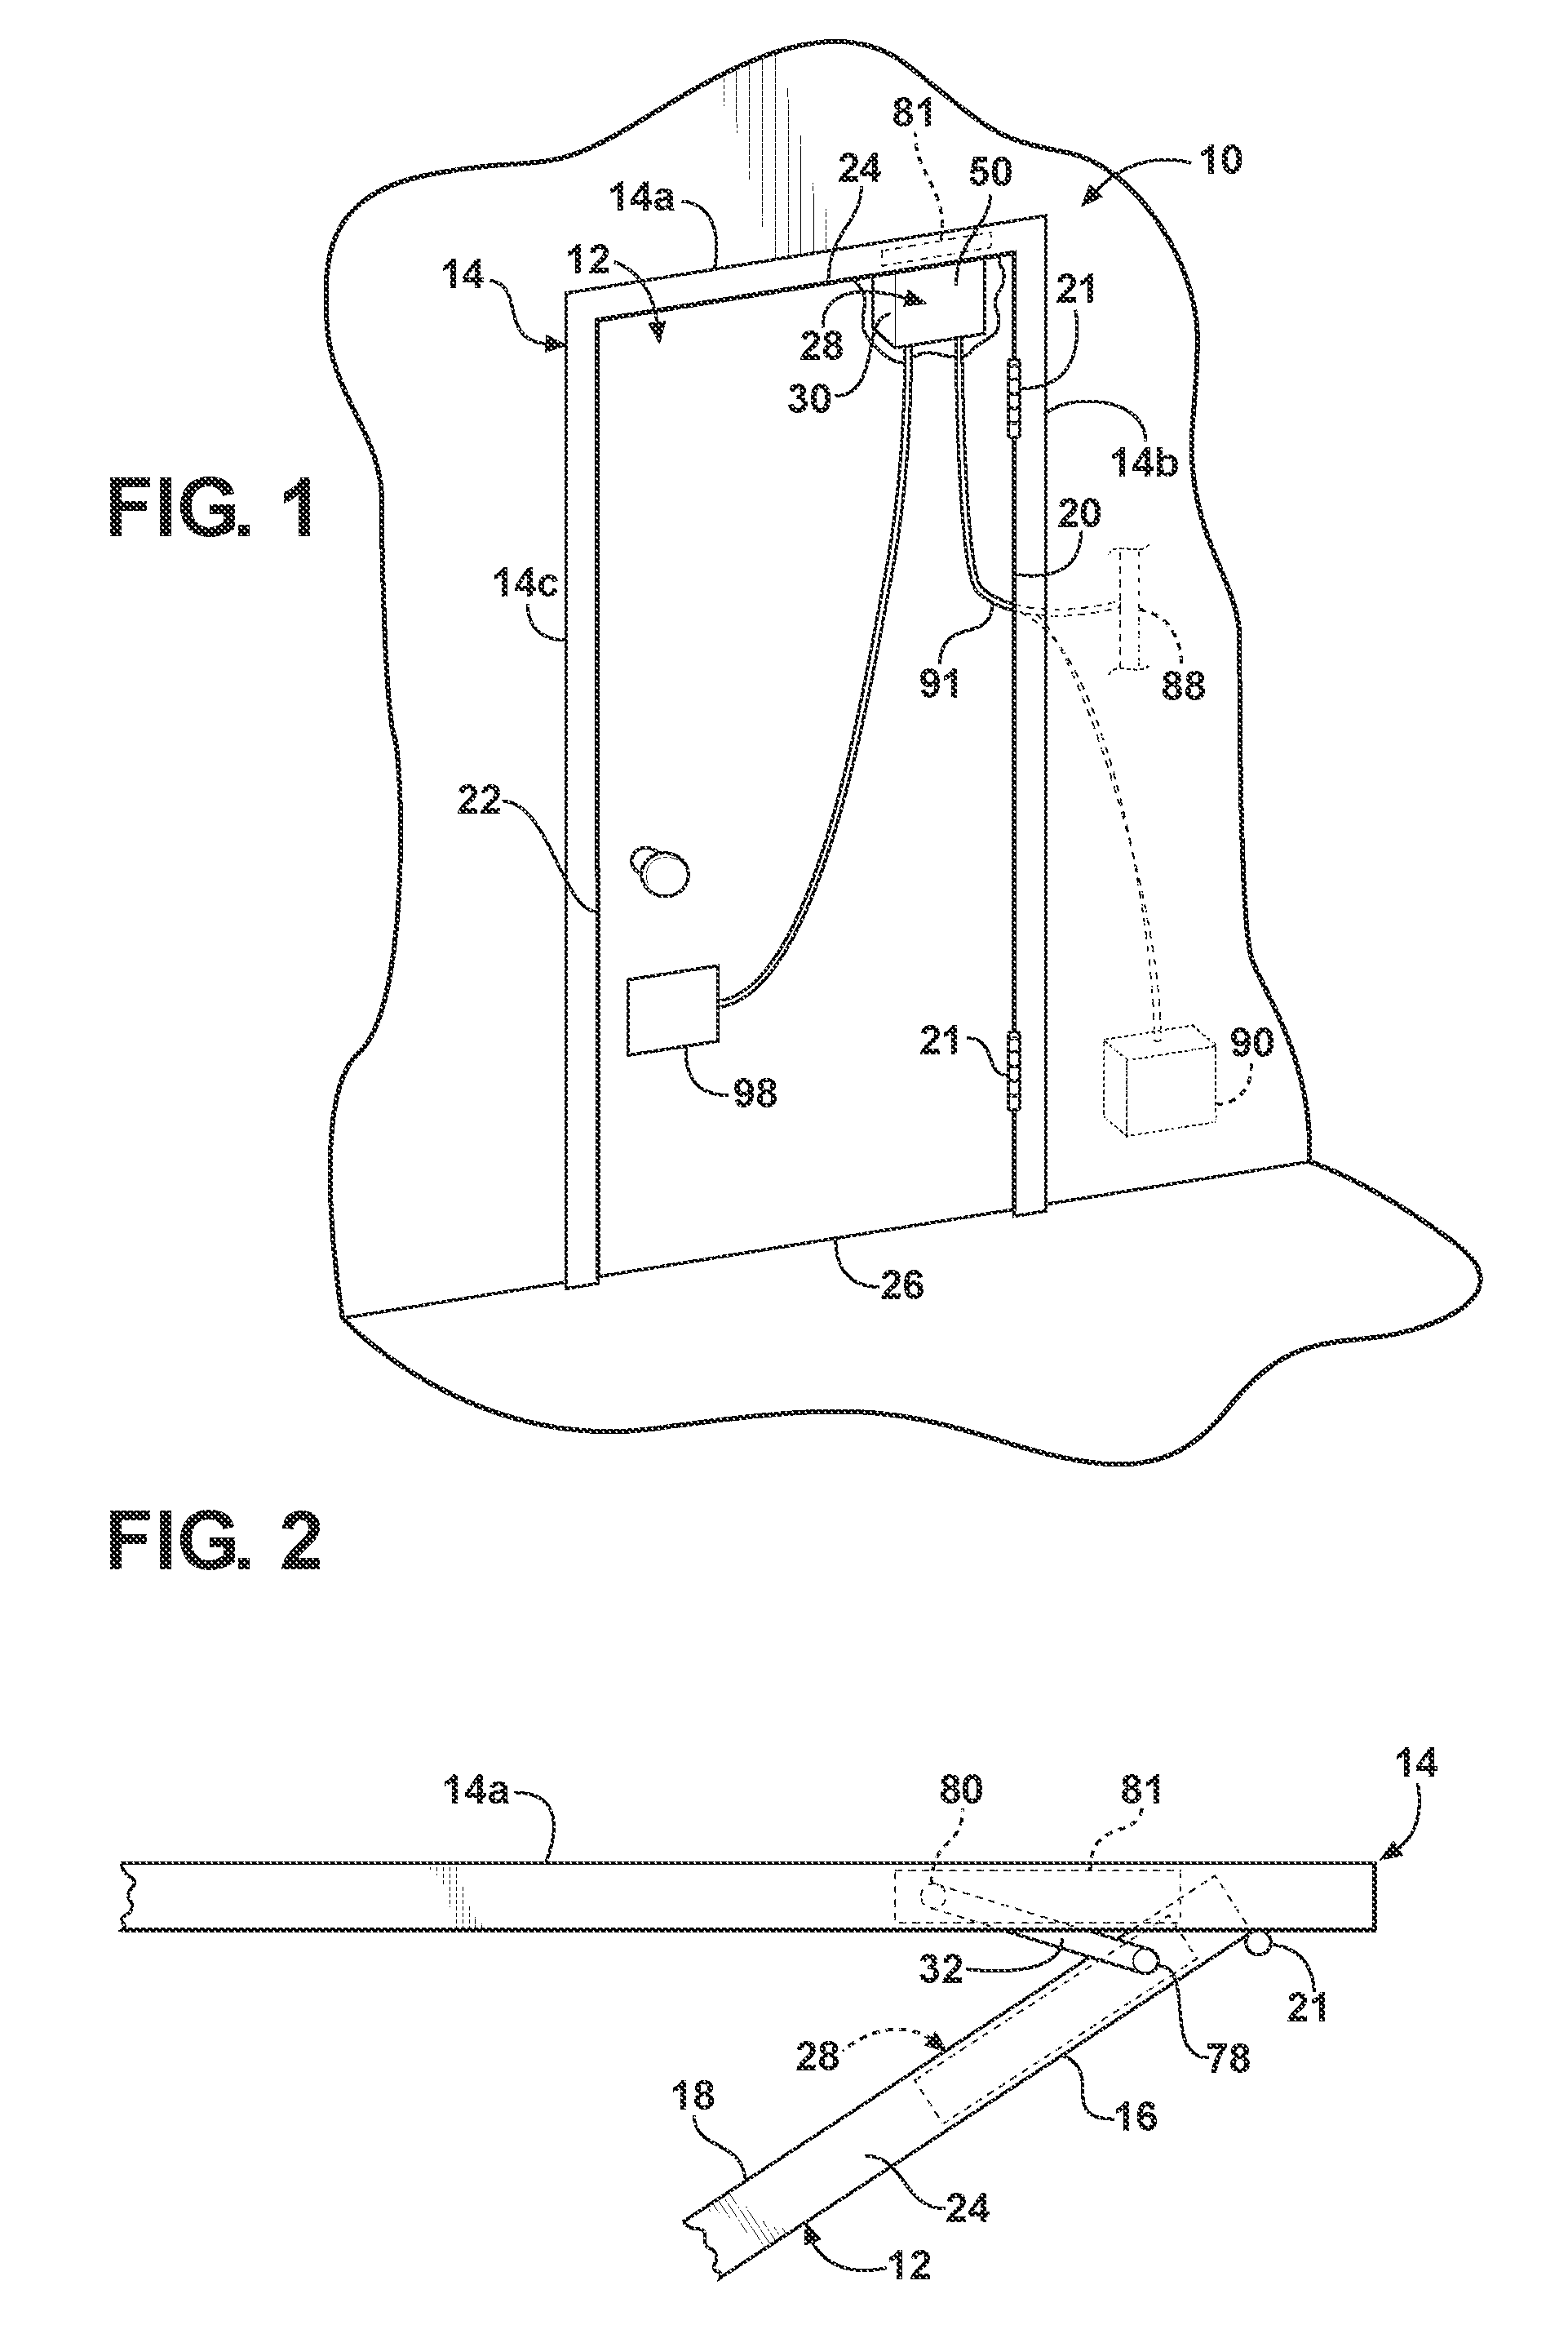 Method of controlling an automatic door system